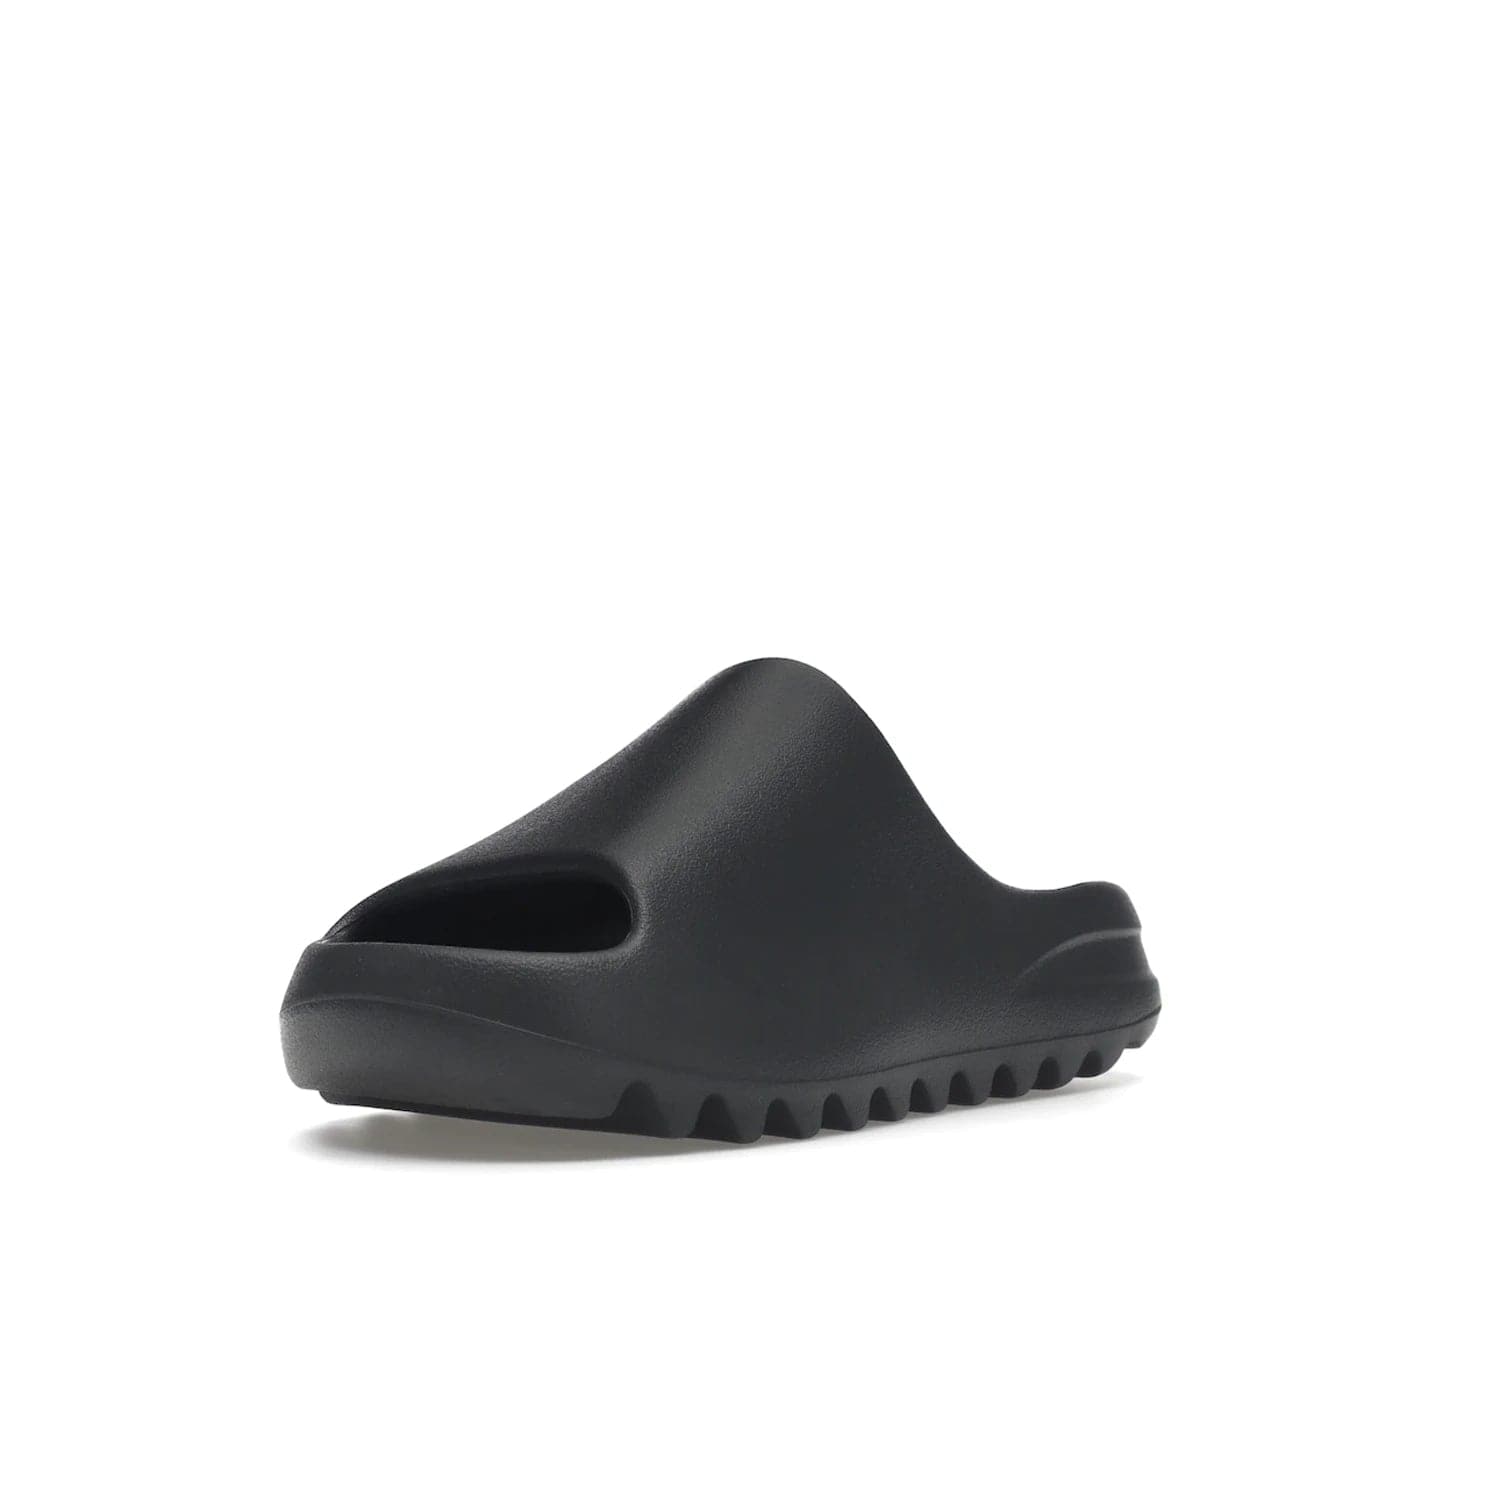 adidas Yeezy Slide Slate Grey - Image 14 - Only at www.BallersClubKickz.com - Stylish & comfortable adidas Yeezy Slide Slate Grey features an EVA foam upper, strategic cutouts, textured outsole pattern, & easy slip-on design for modern comfort & classic style.